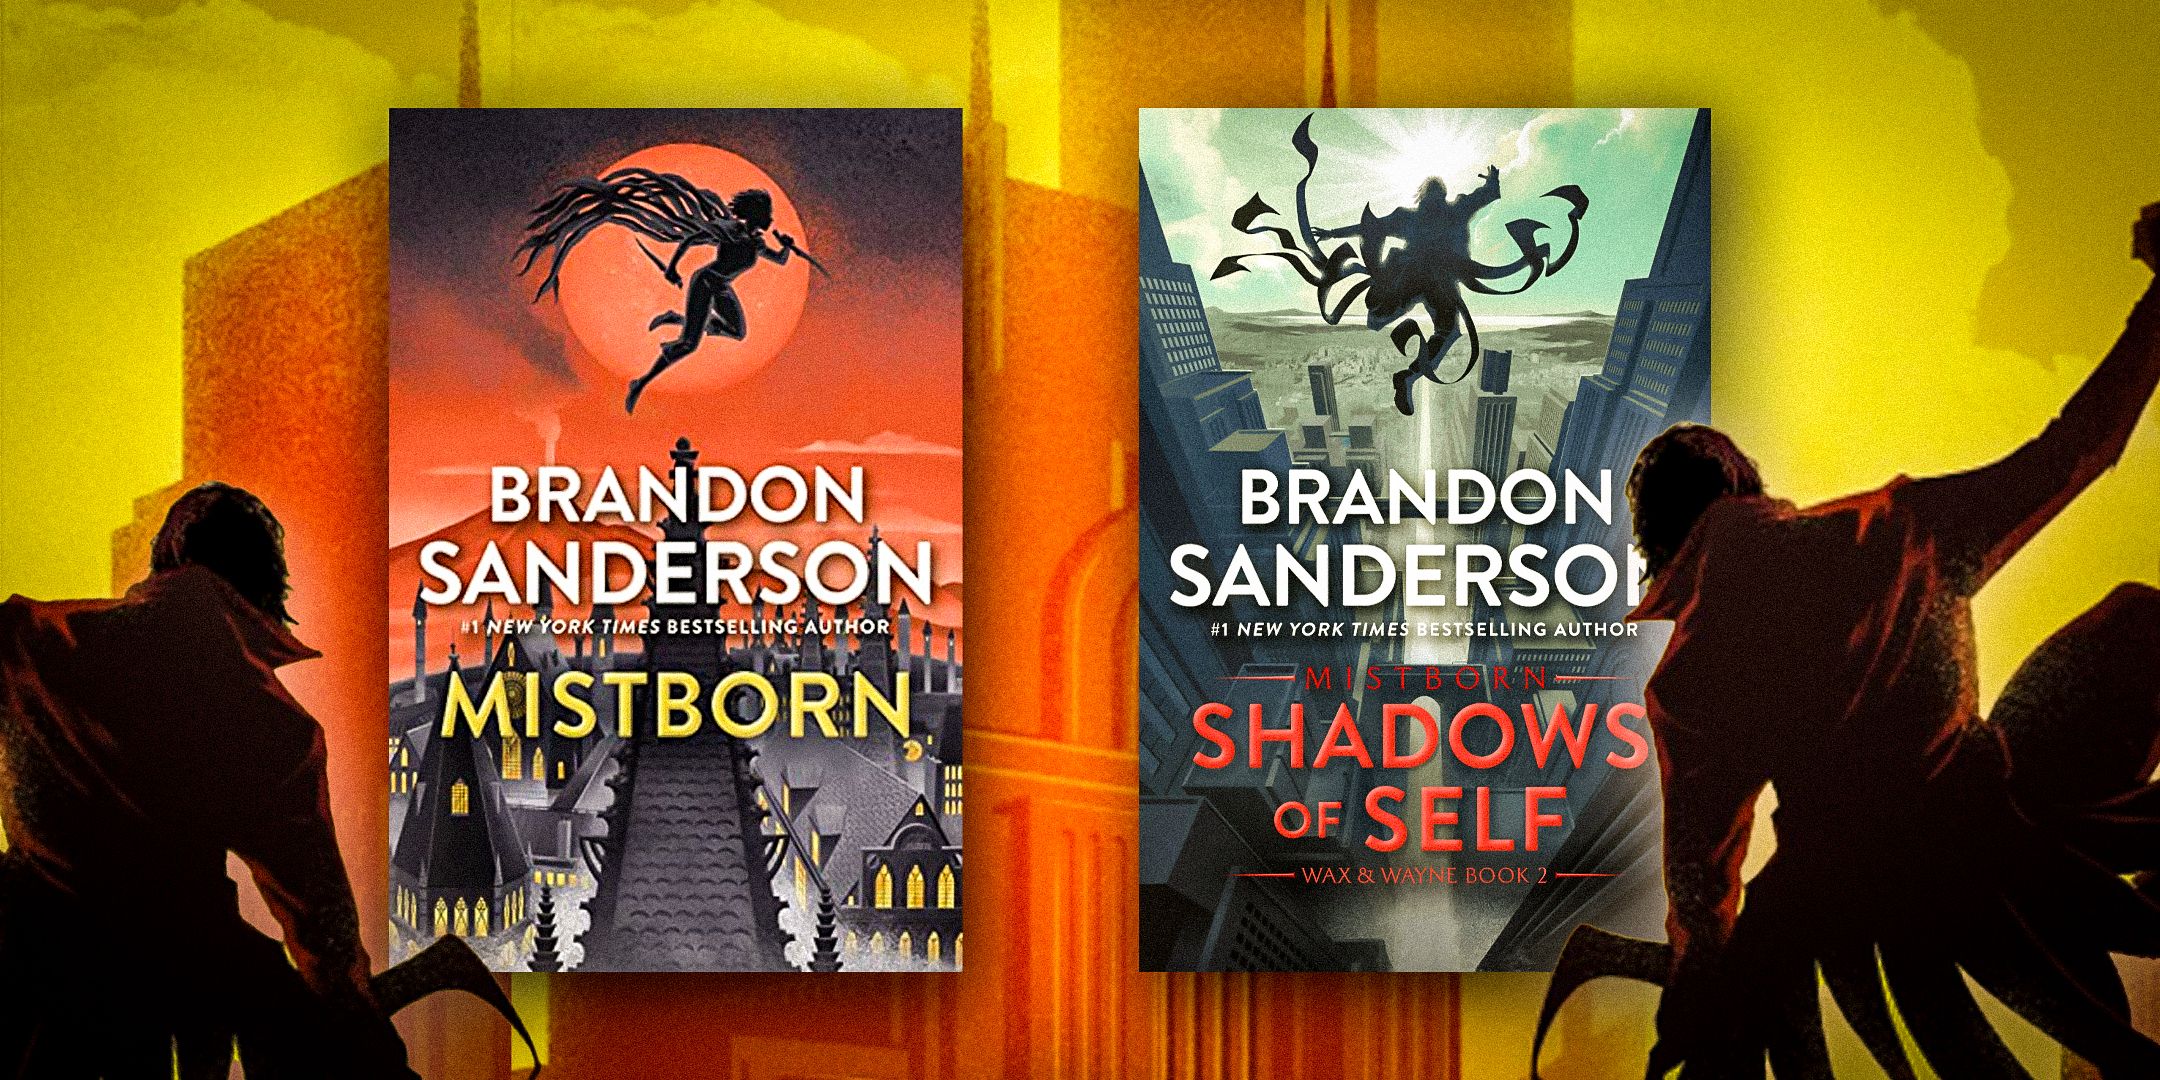 The covers of Mistborn: The Final Empire and Shadows of Self by Brandon Sanderson